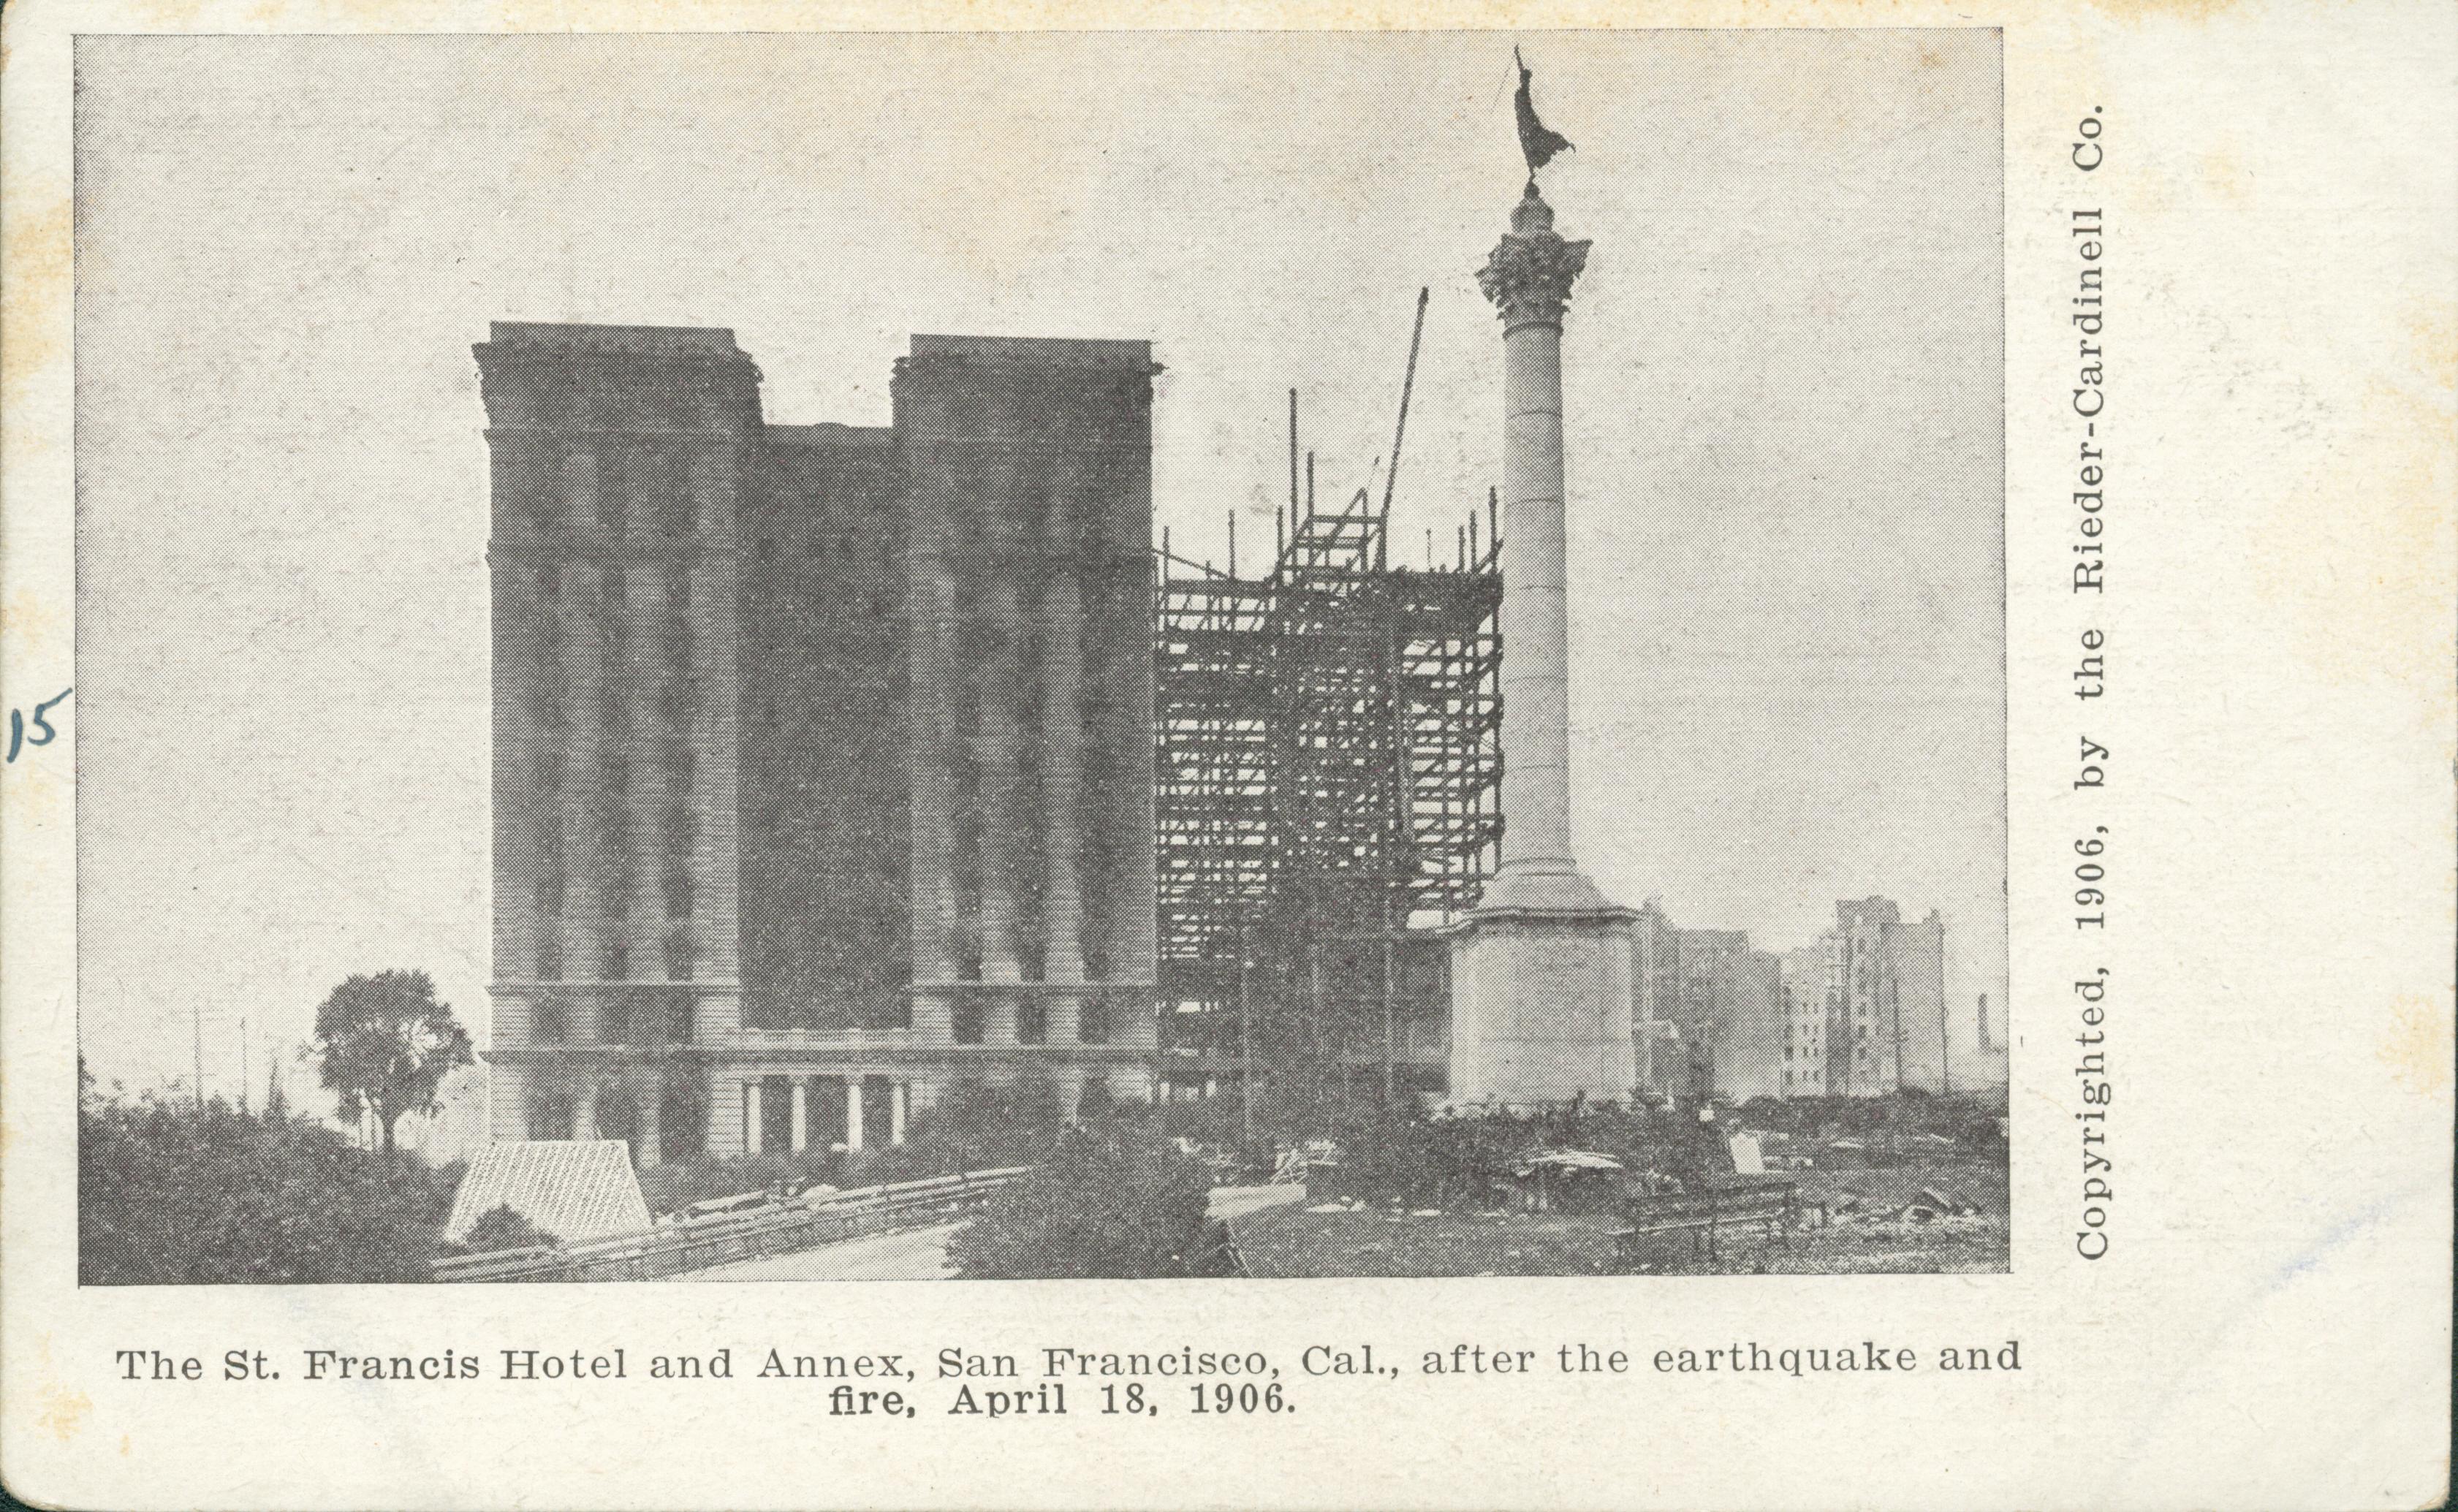 Shows the destruction of the St. Francis Hotel San Francisco.